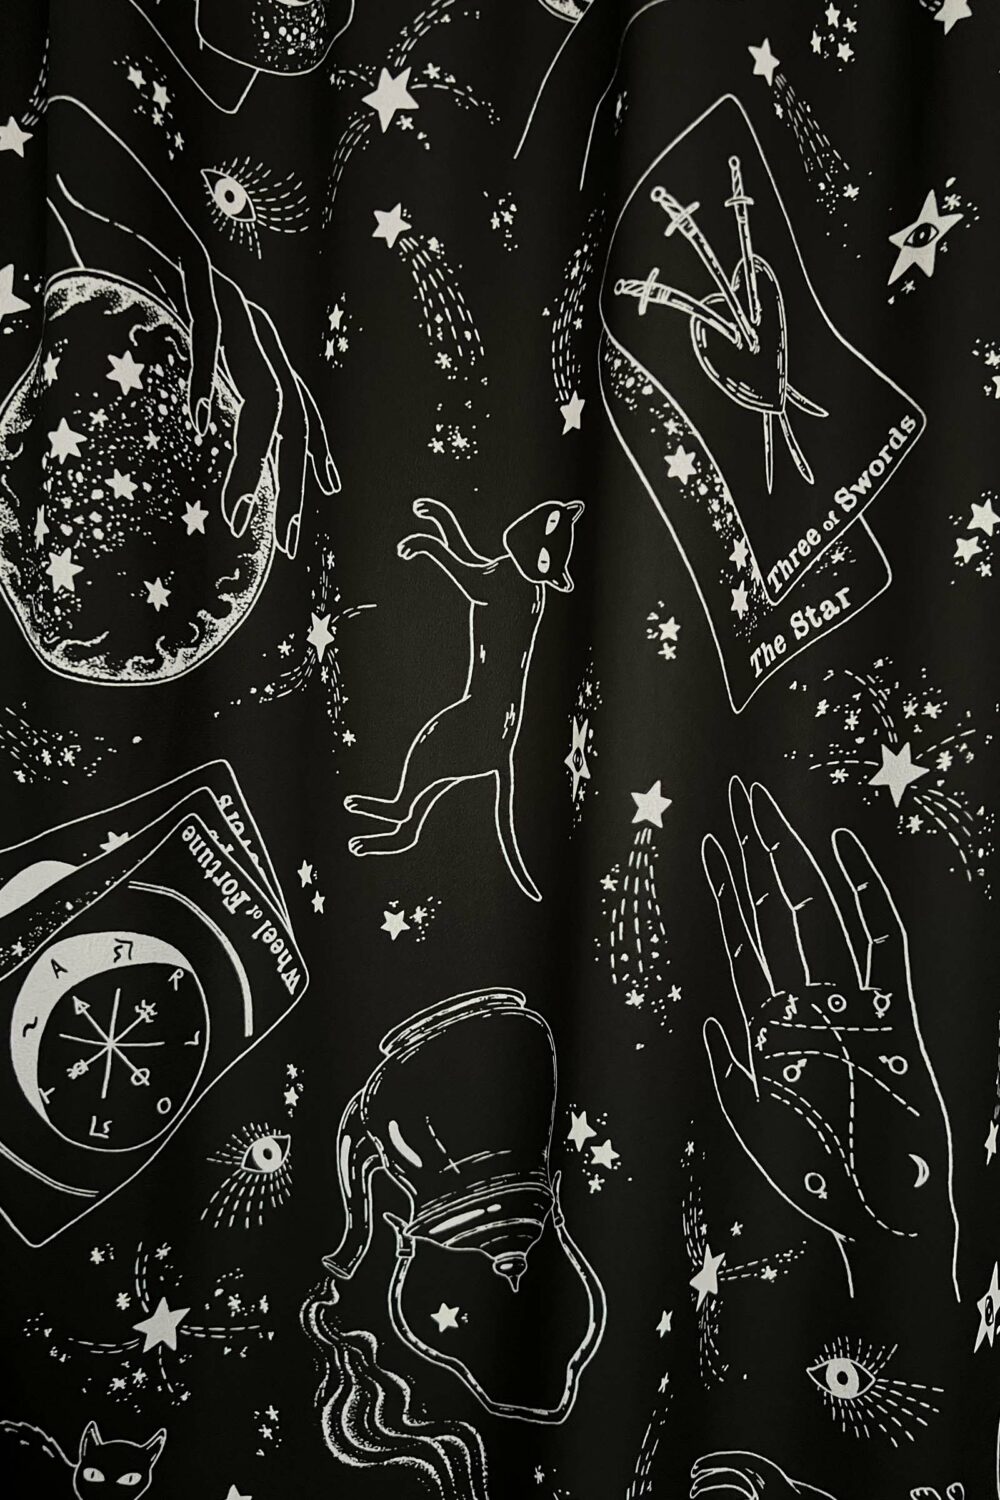 cosmic drifters travelling carnival fabric print